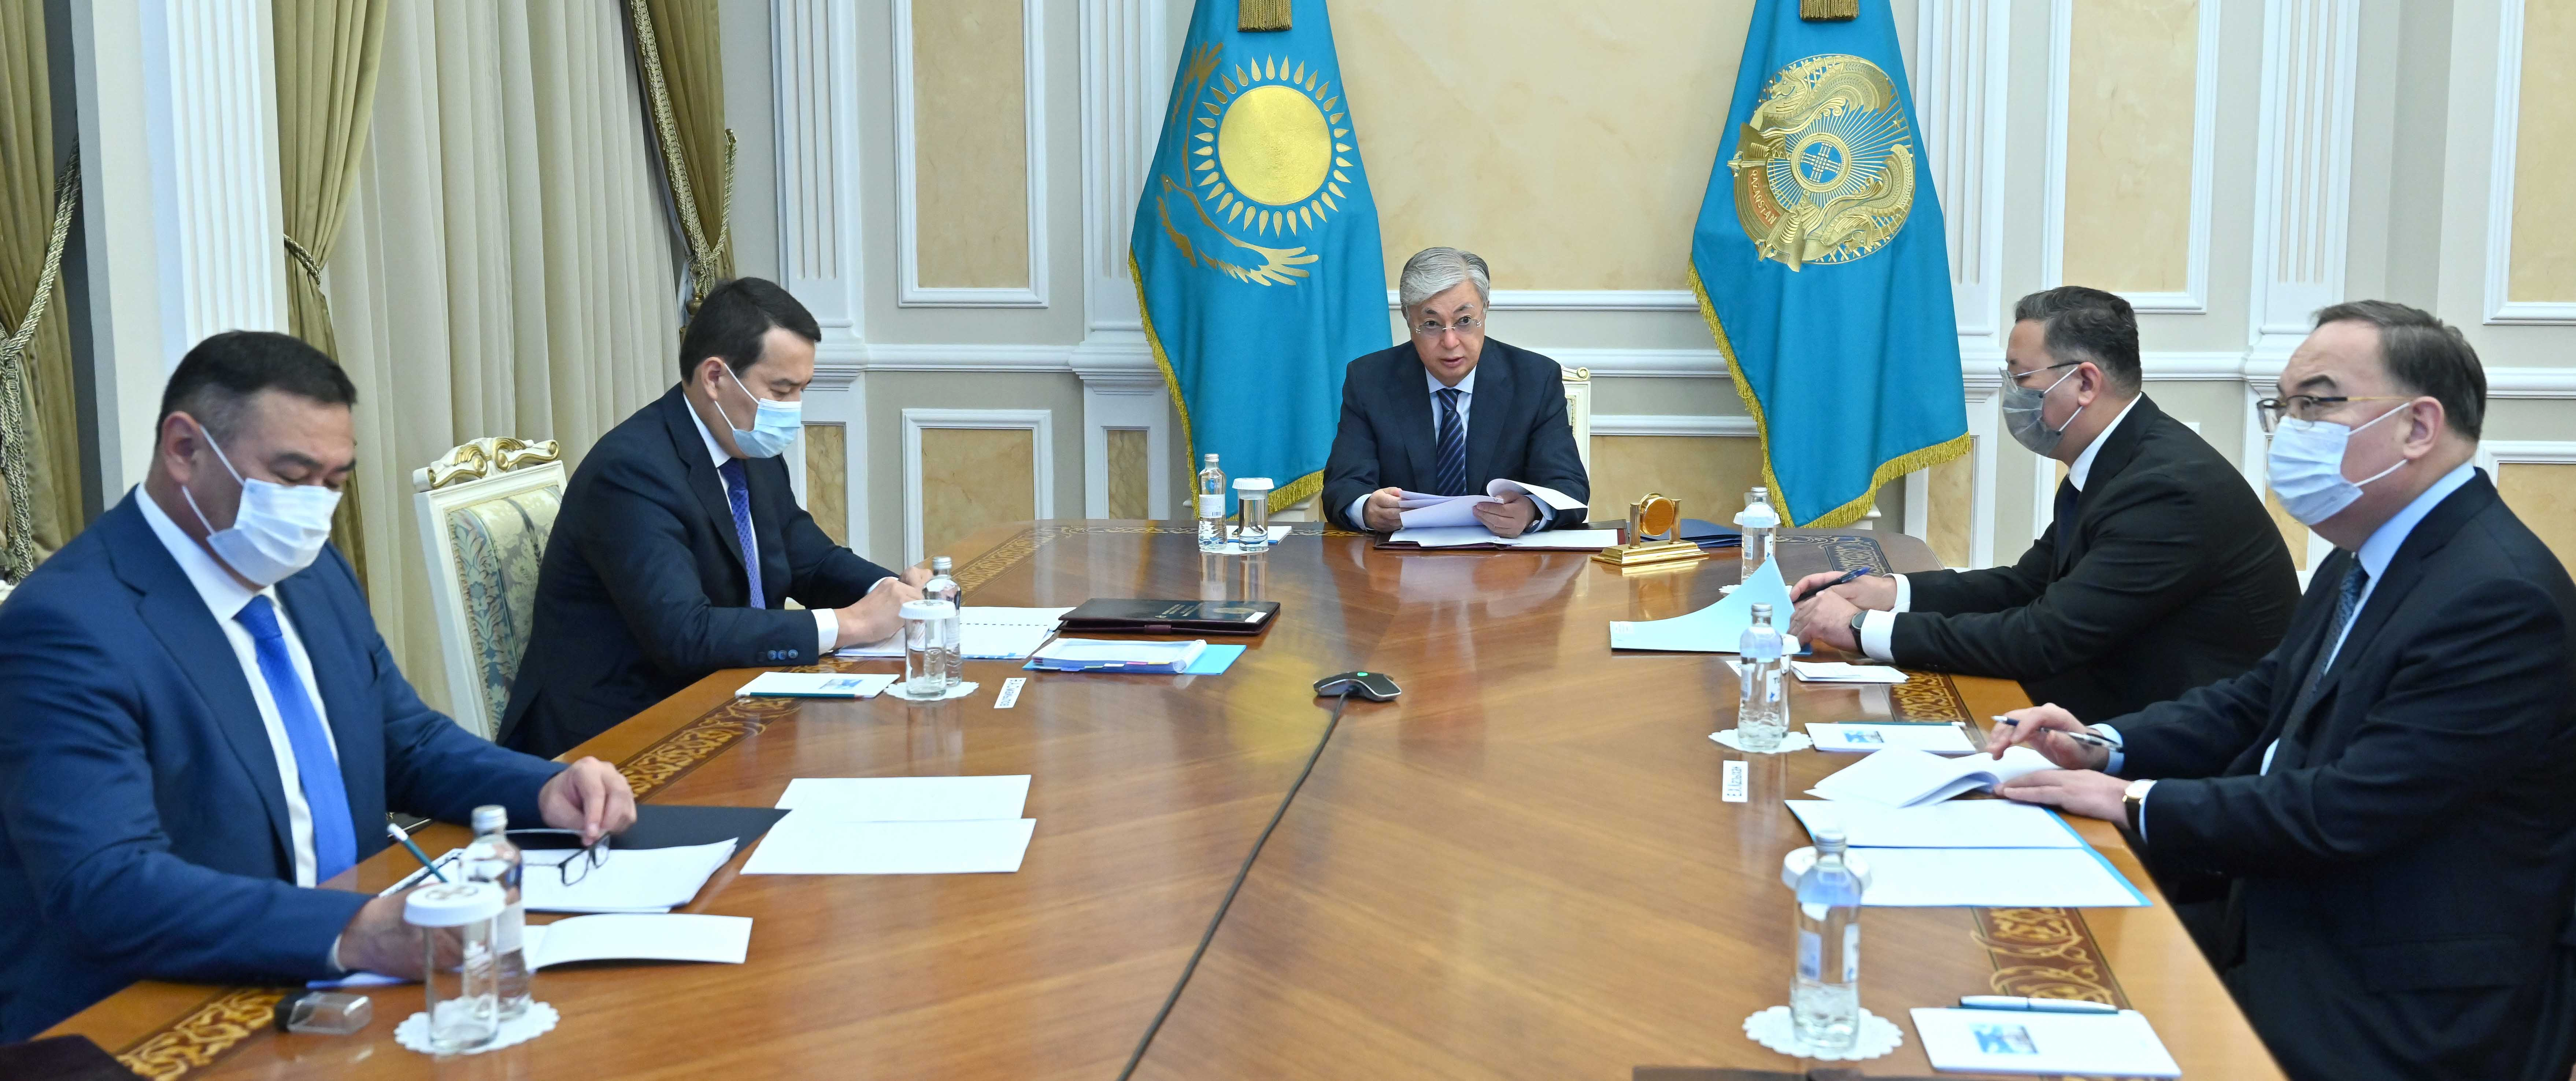 Kazakhstan Security Council Meeting to Address Environmental and Water Security Concerns